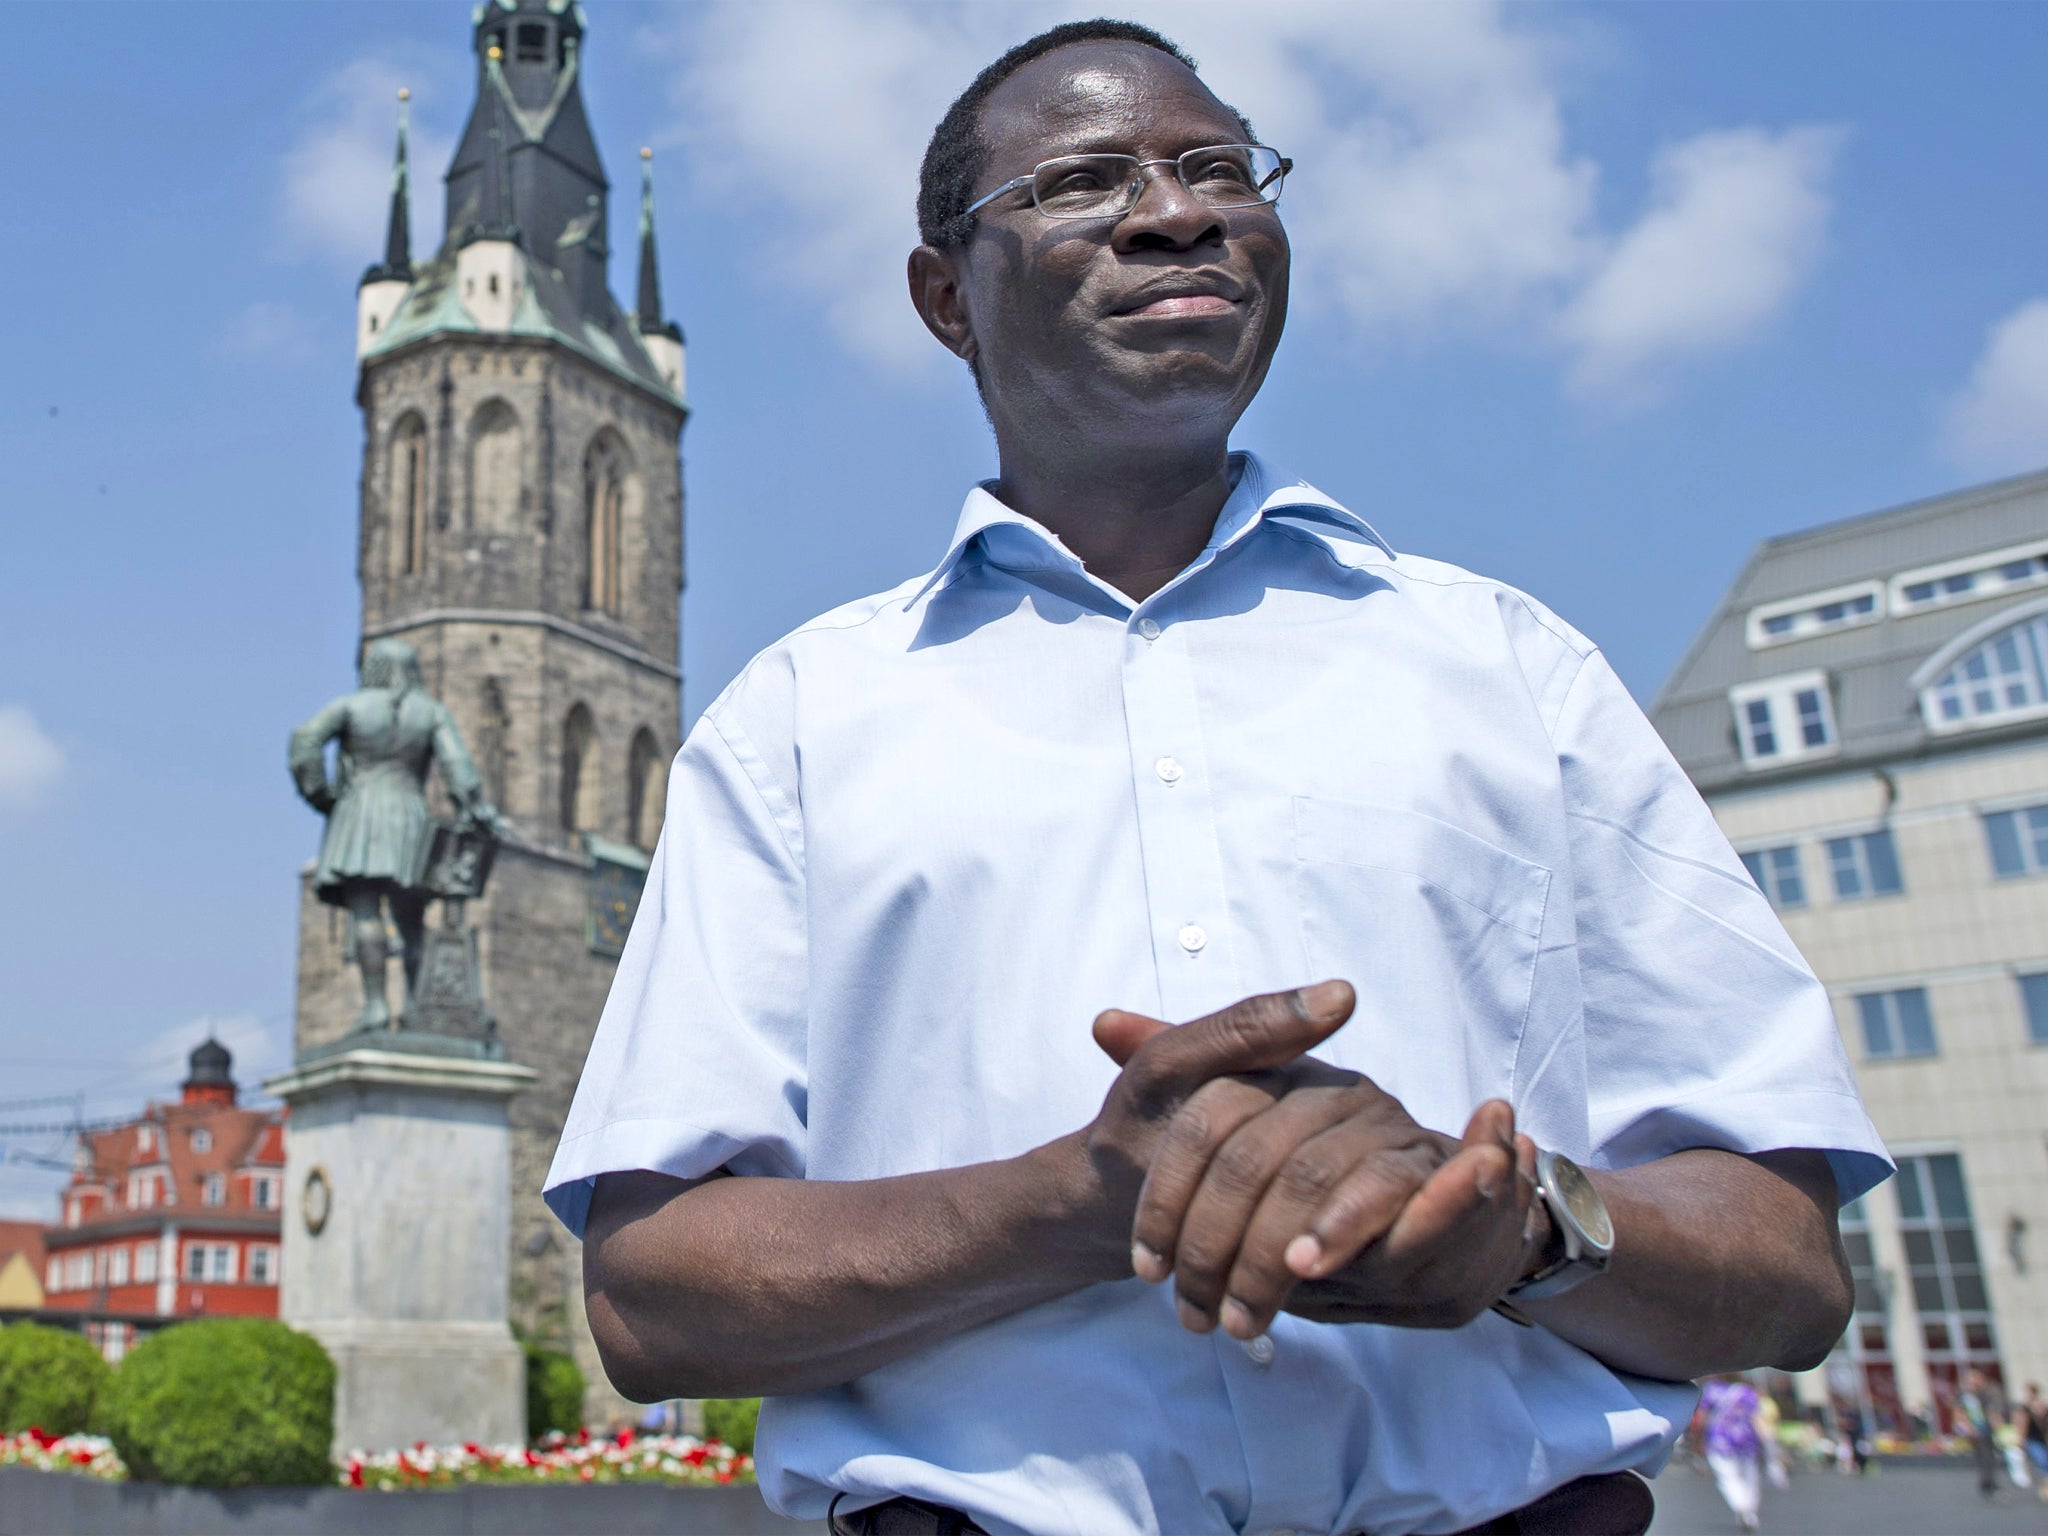 Mr Diaby’s ascent in German politics seems like material taken from a Hollywood film script